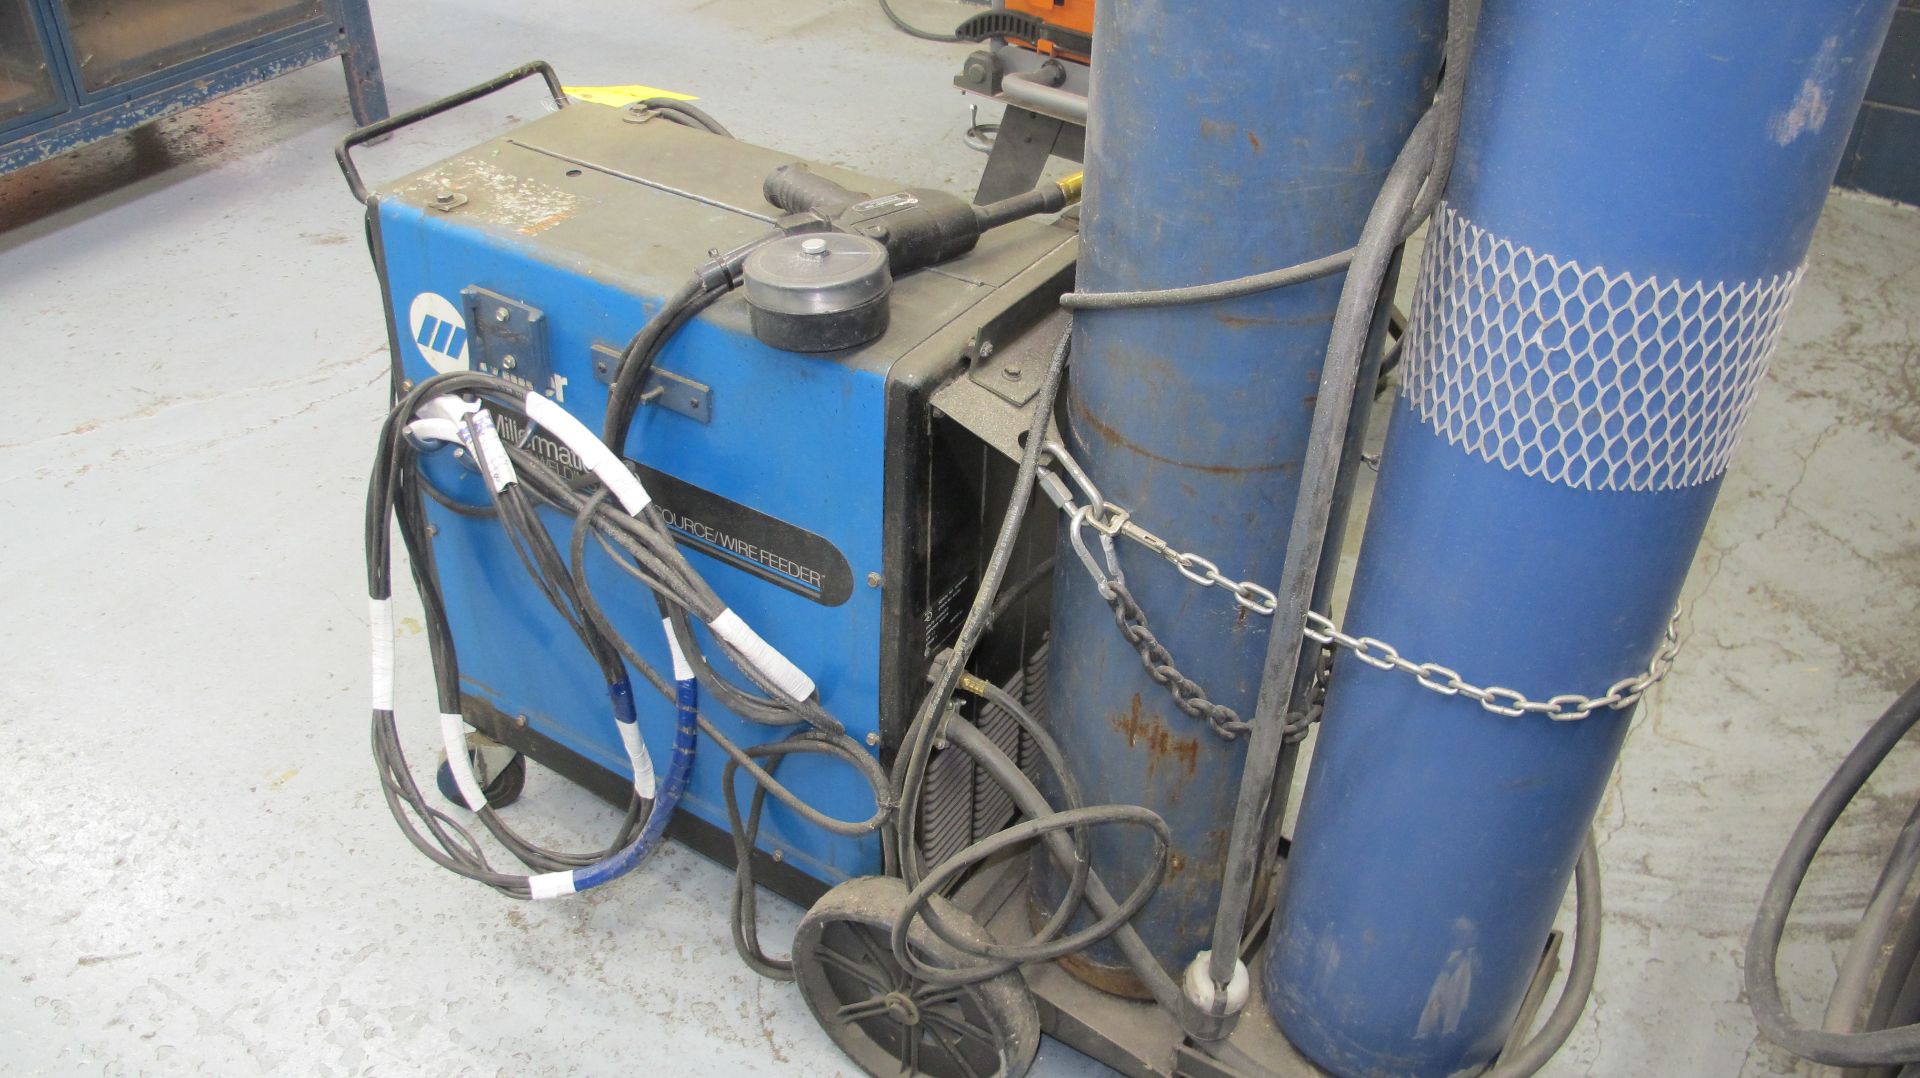 MILLER MILLERMATIC 250 CV-DC WELDING POWER SOURCE W/ MILLER SPOOLMATIC 15A WIRE FEEDER, CABLES AND - Image 6 of 6